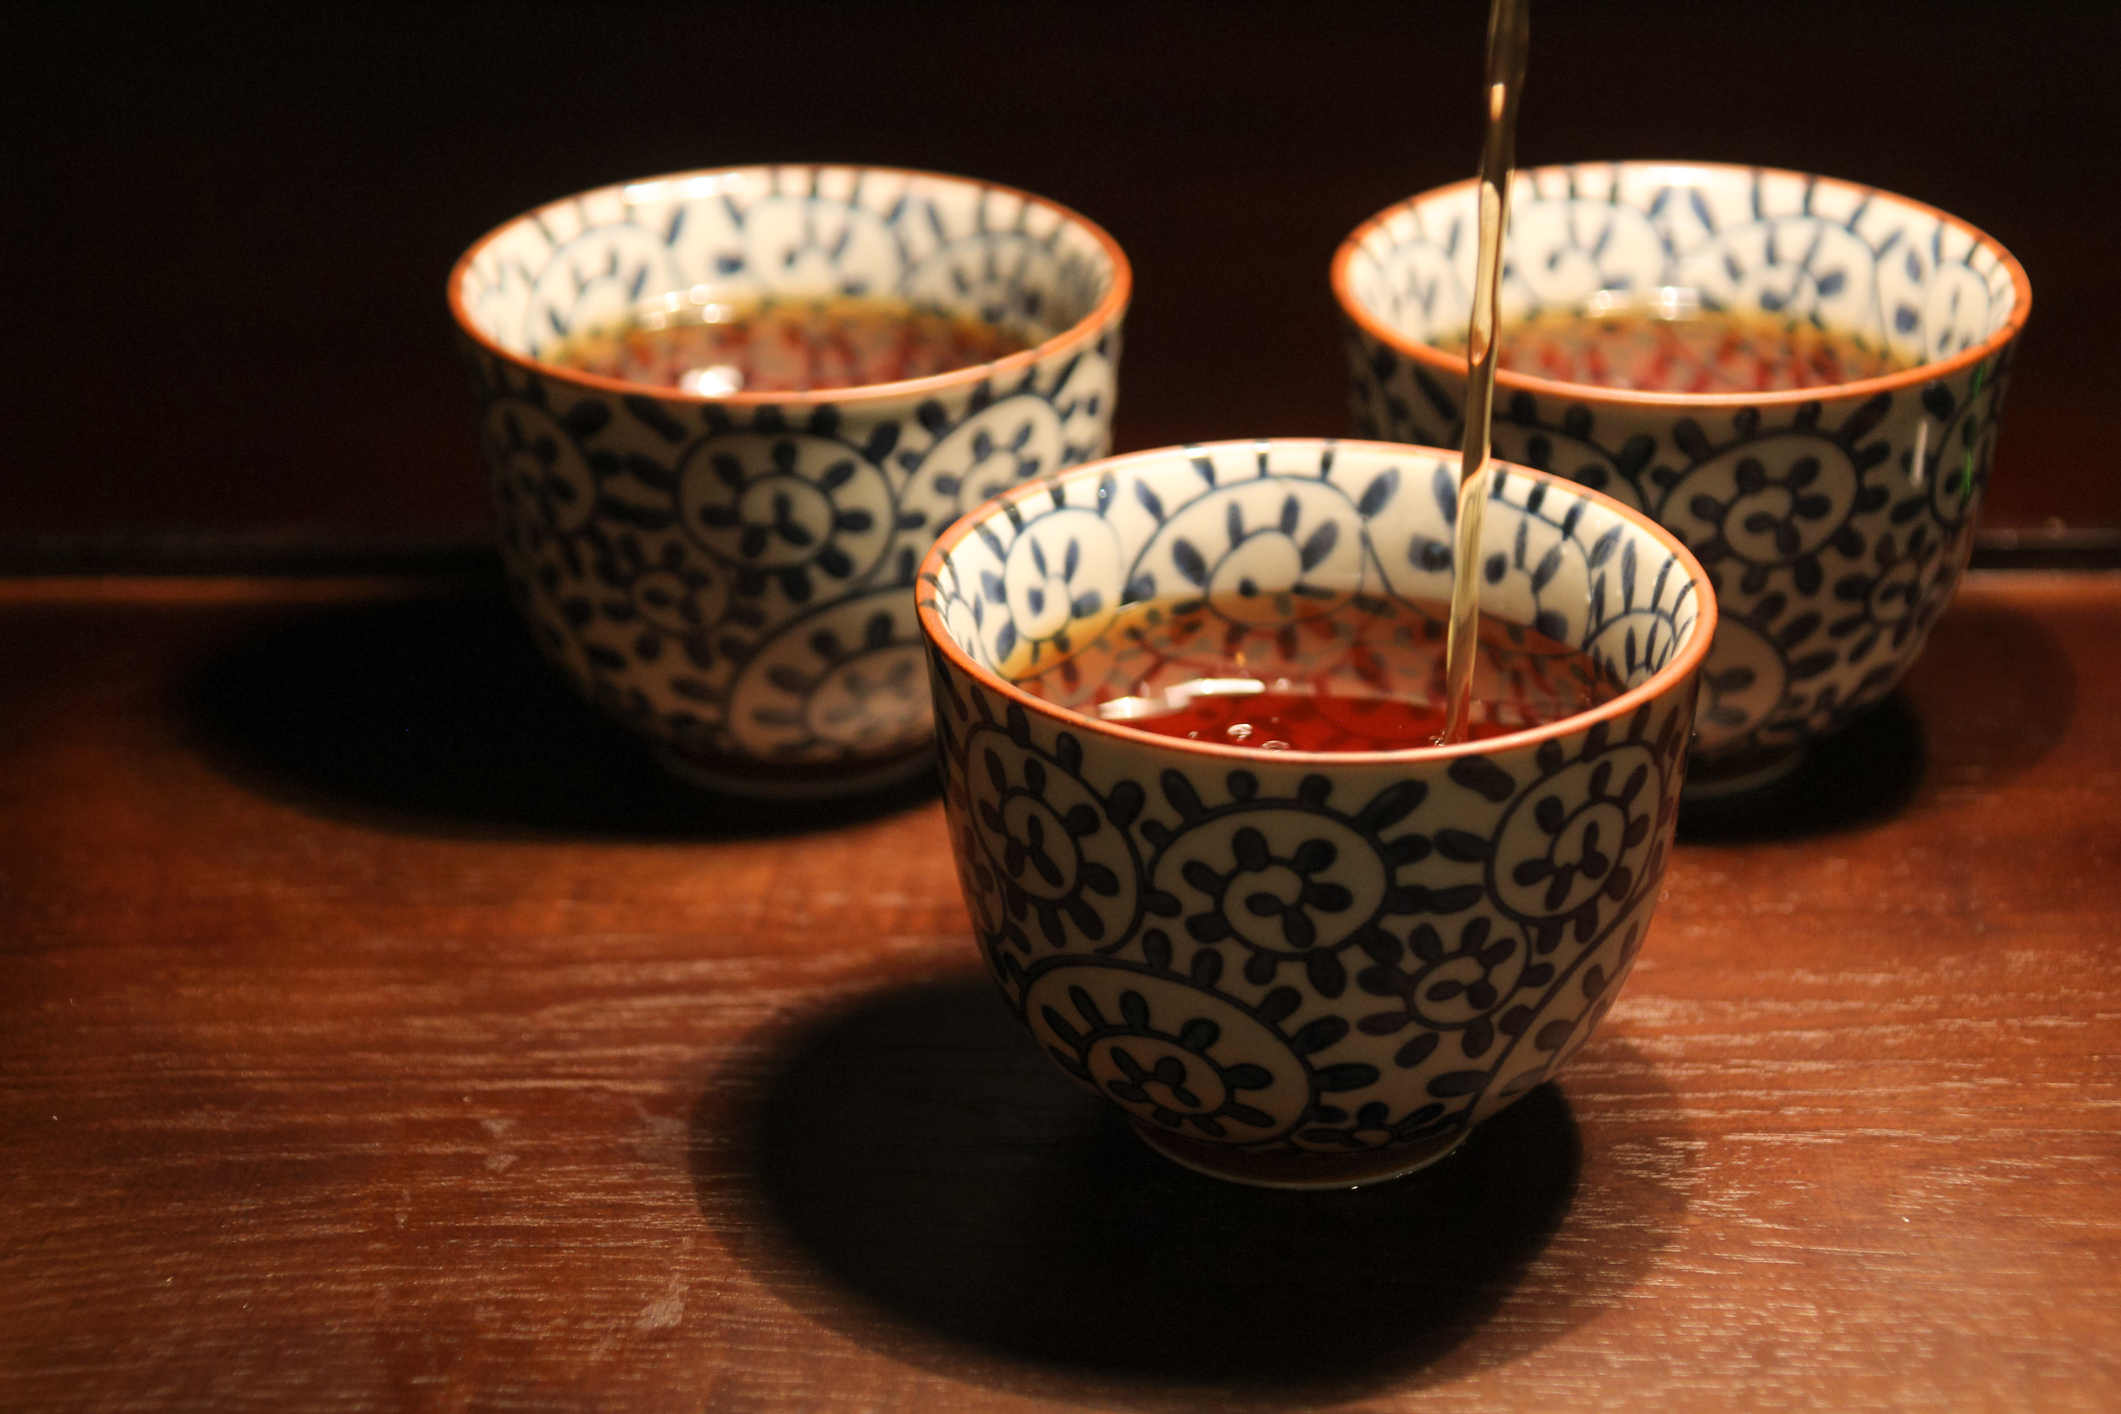 Chinese teacups